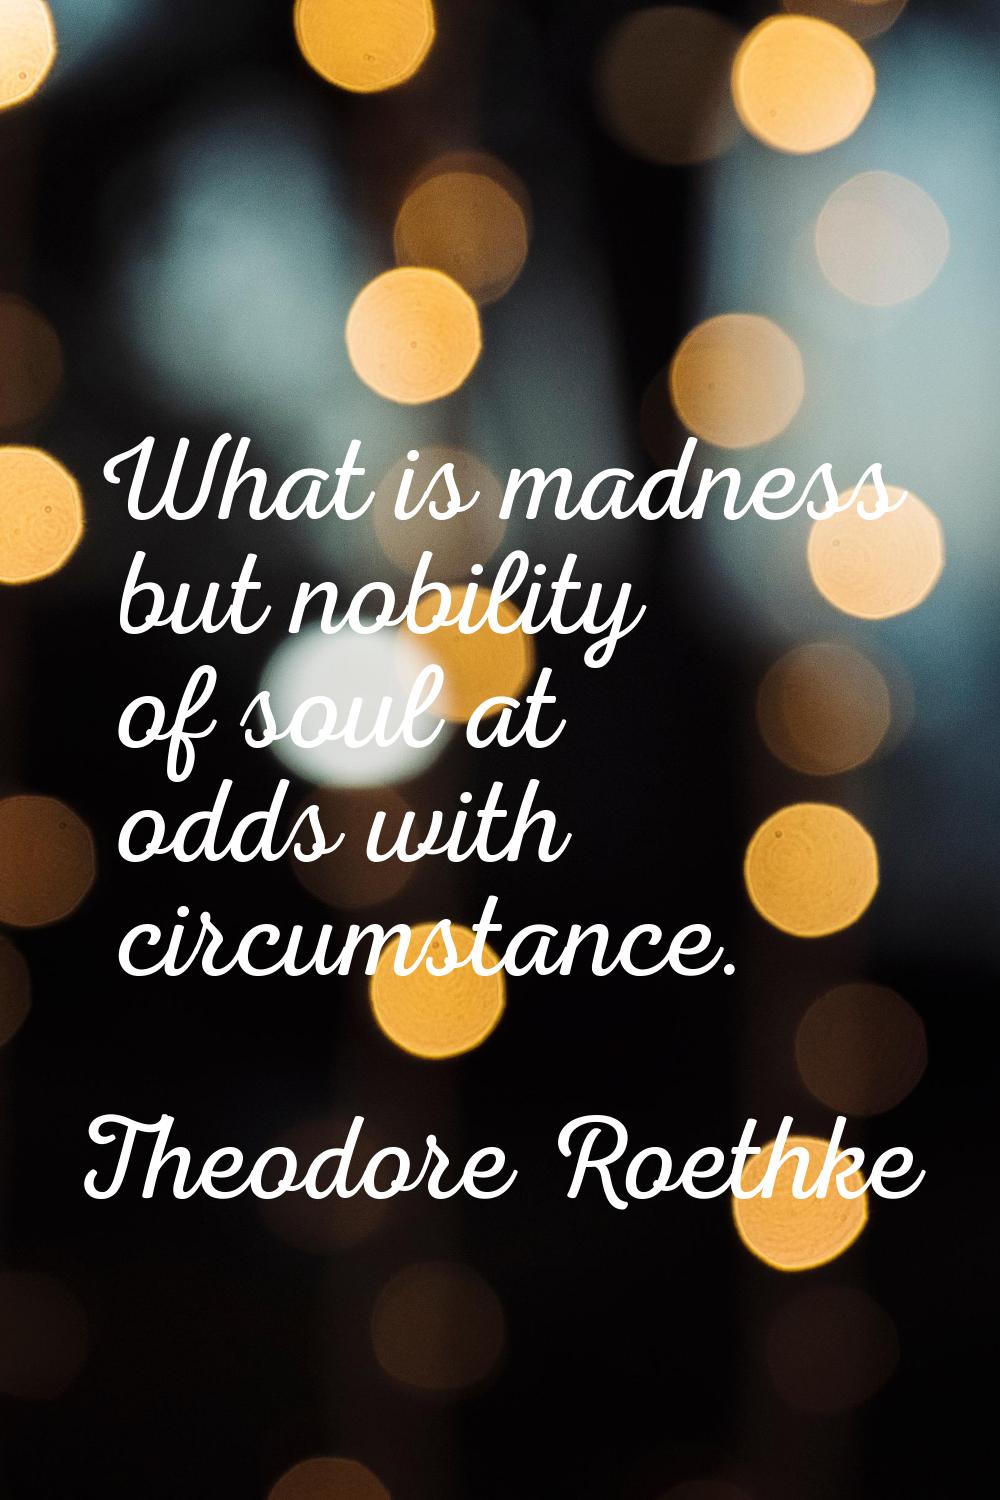 What is madness but nobility of soul at odds with circumstance.